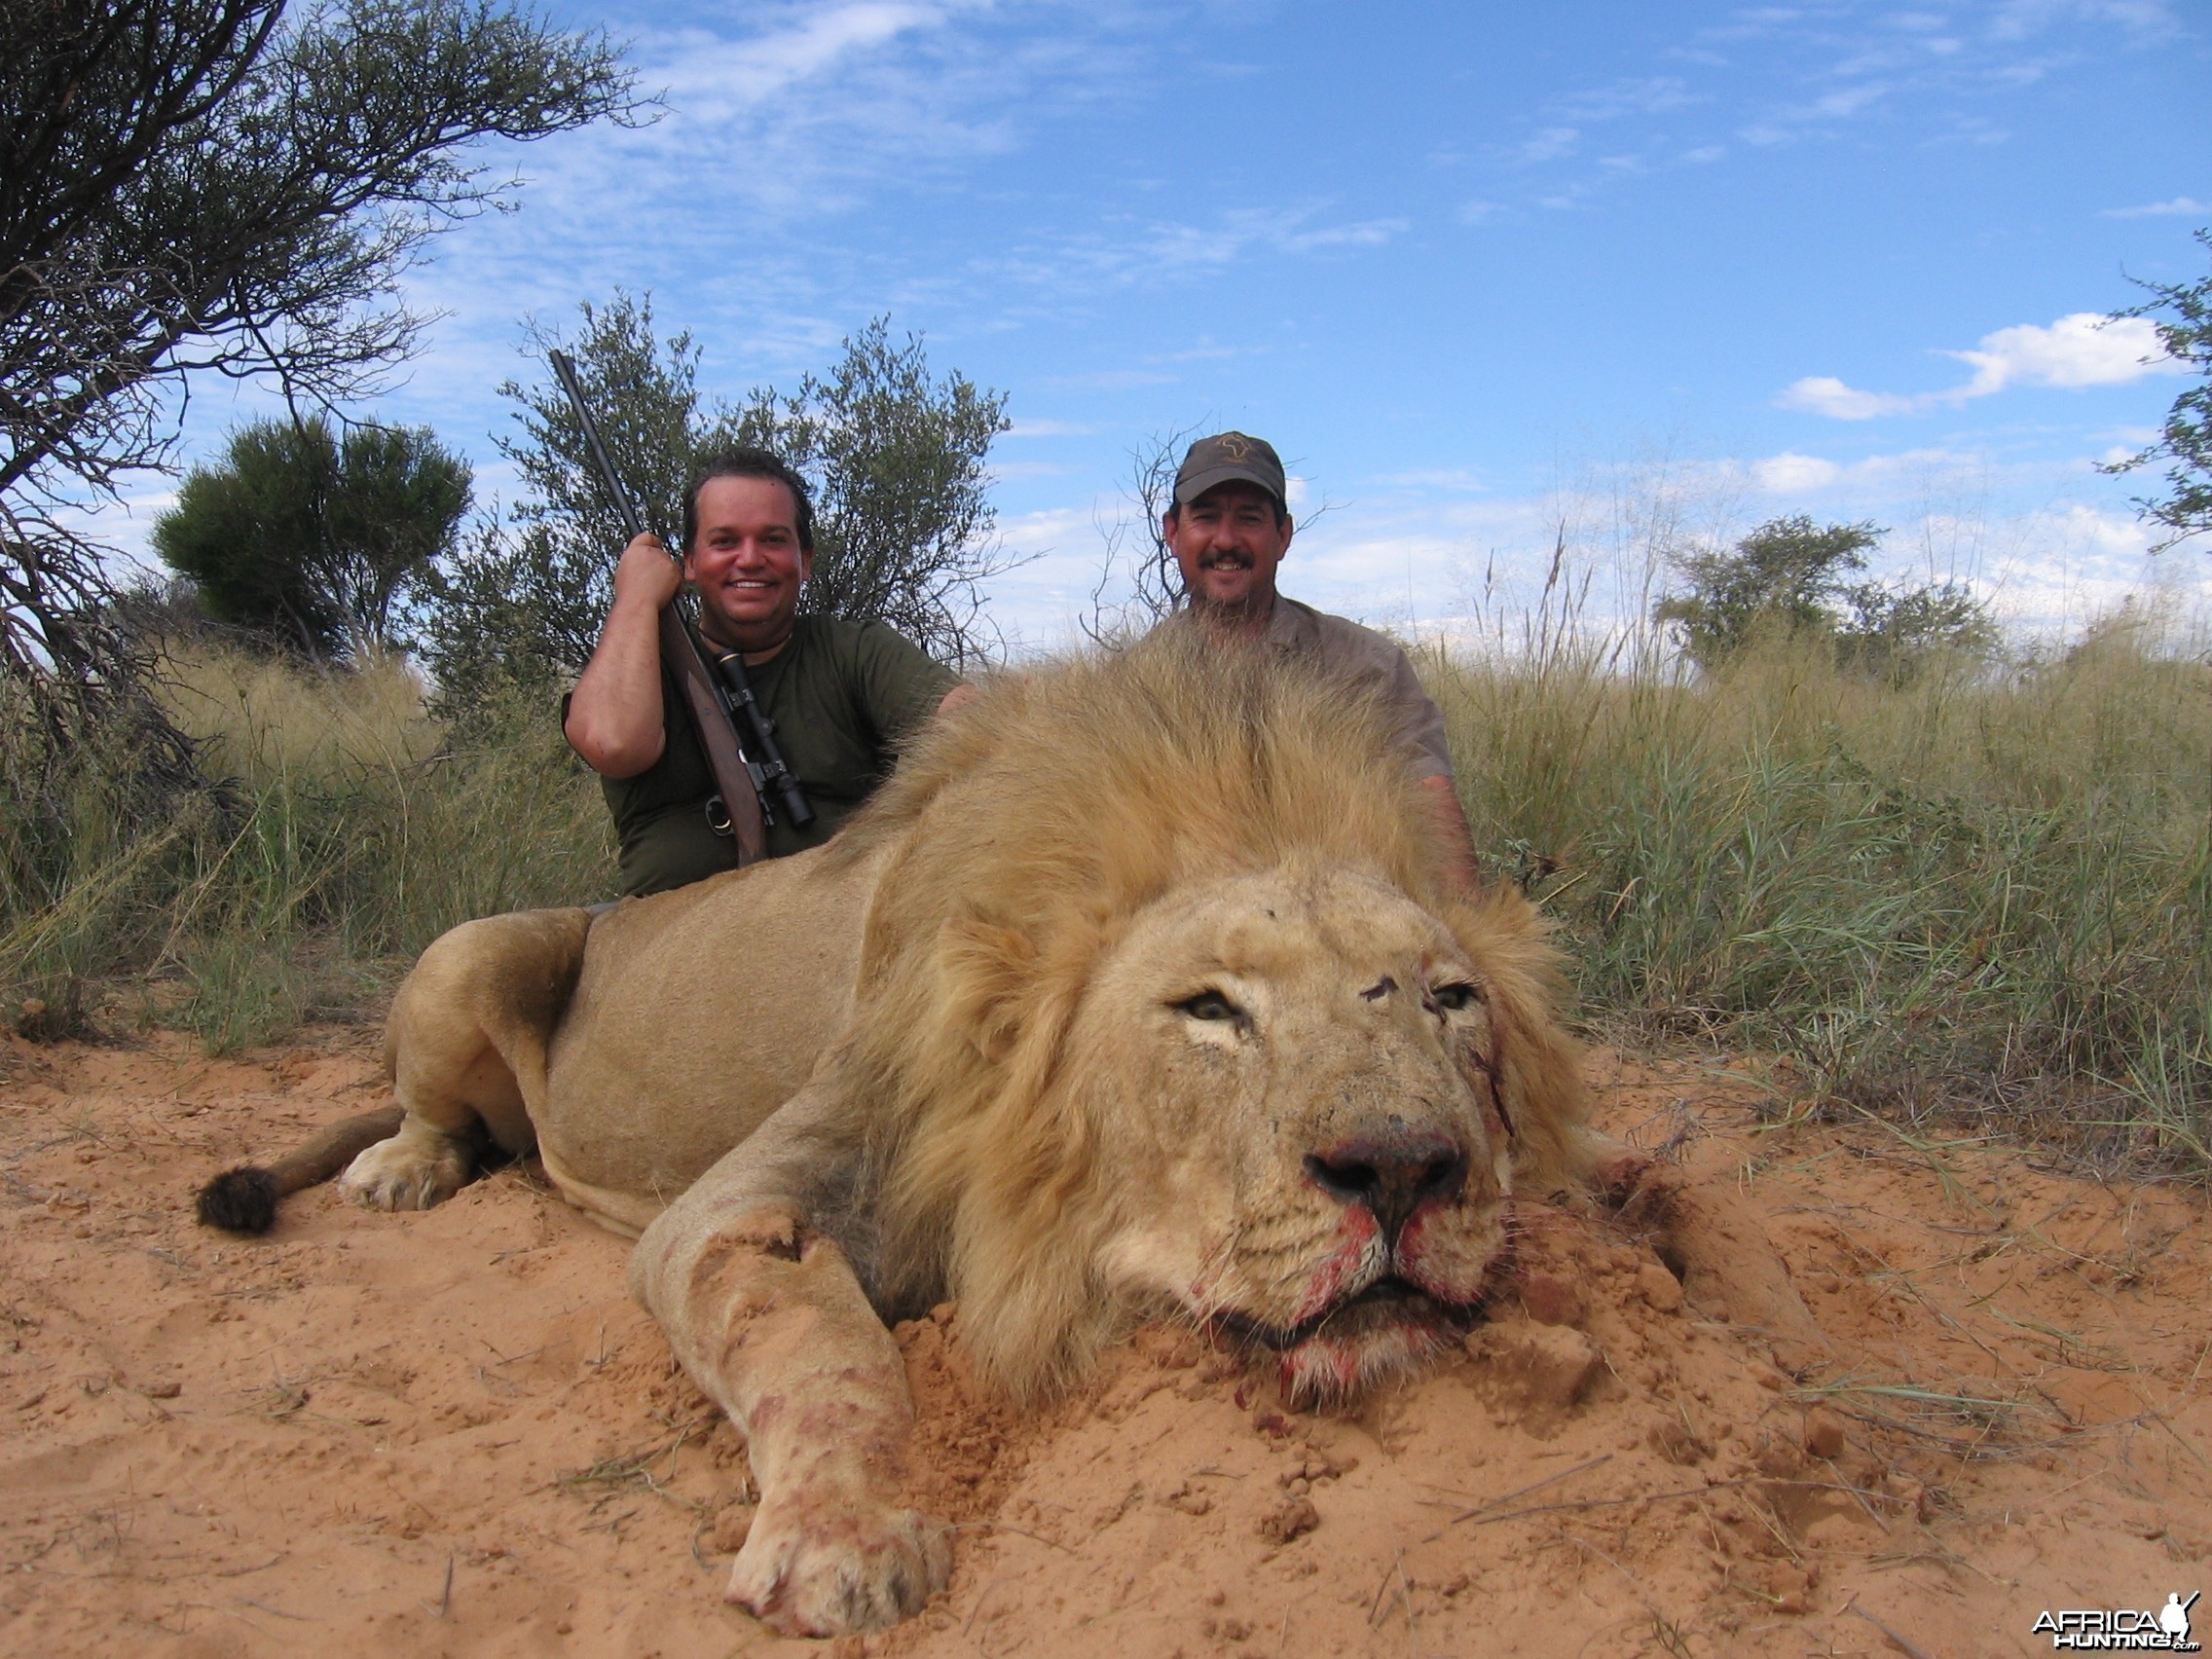 My first Lion - South Africa